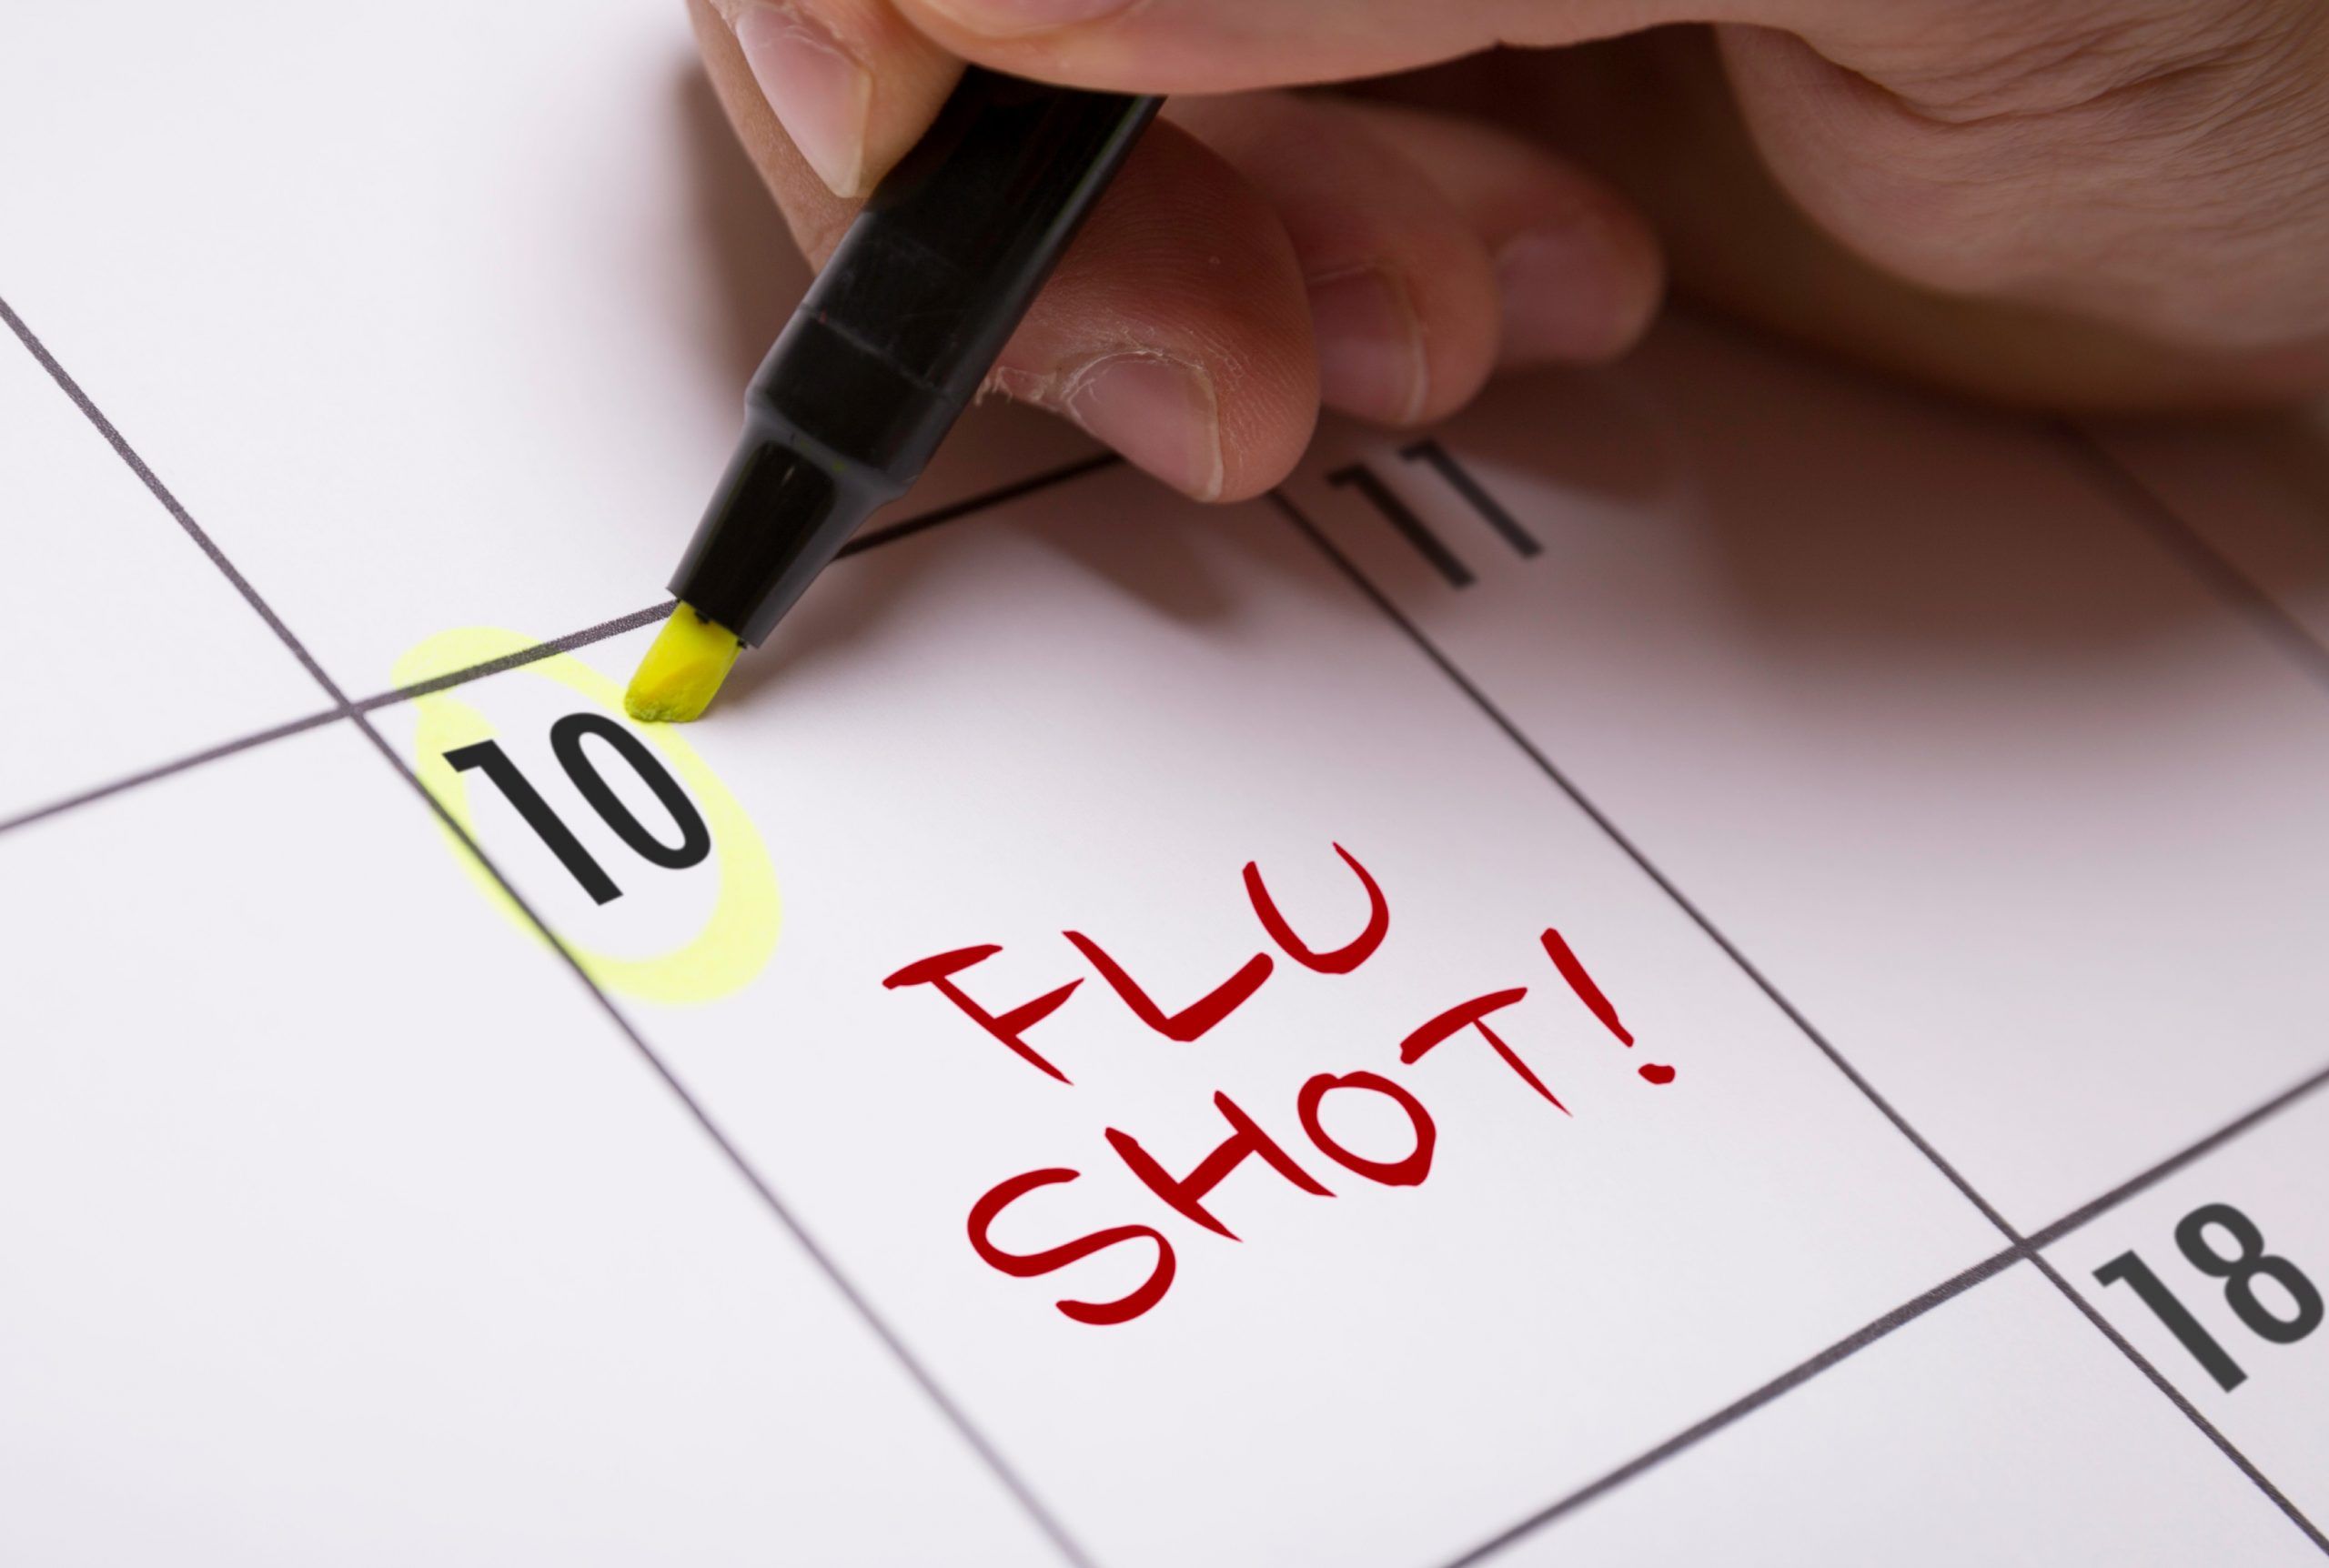 There was a massive surge in demand for the flu shot in Ontario in early fall.